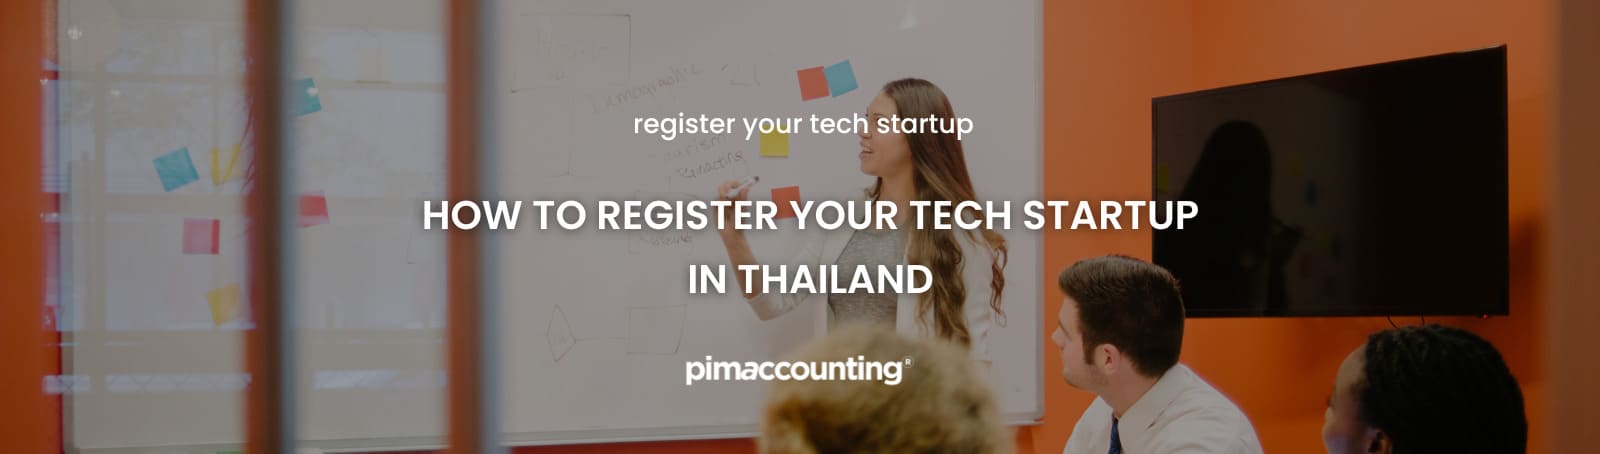 How to register your tech startup in Thailand - Pimaccounting